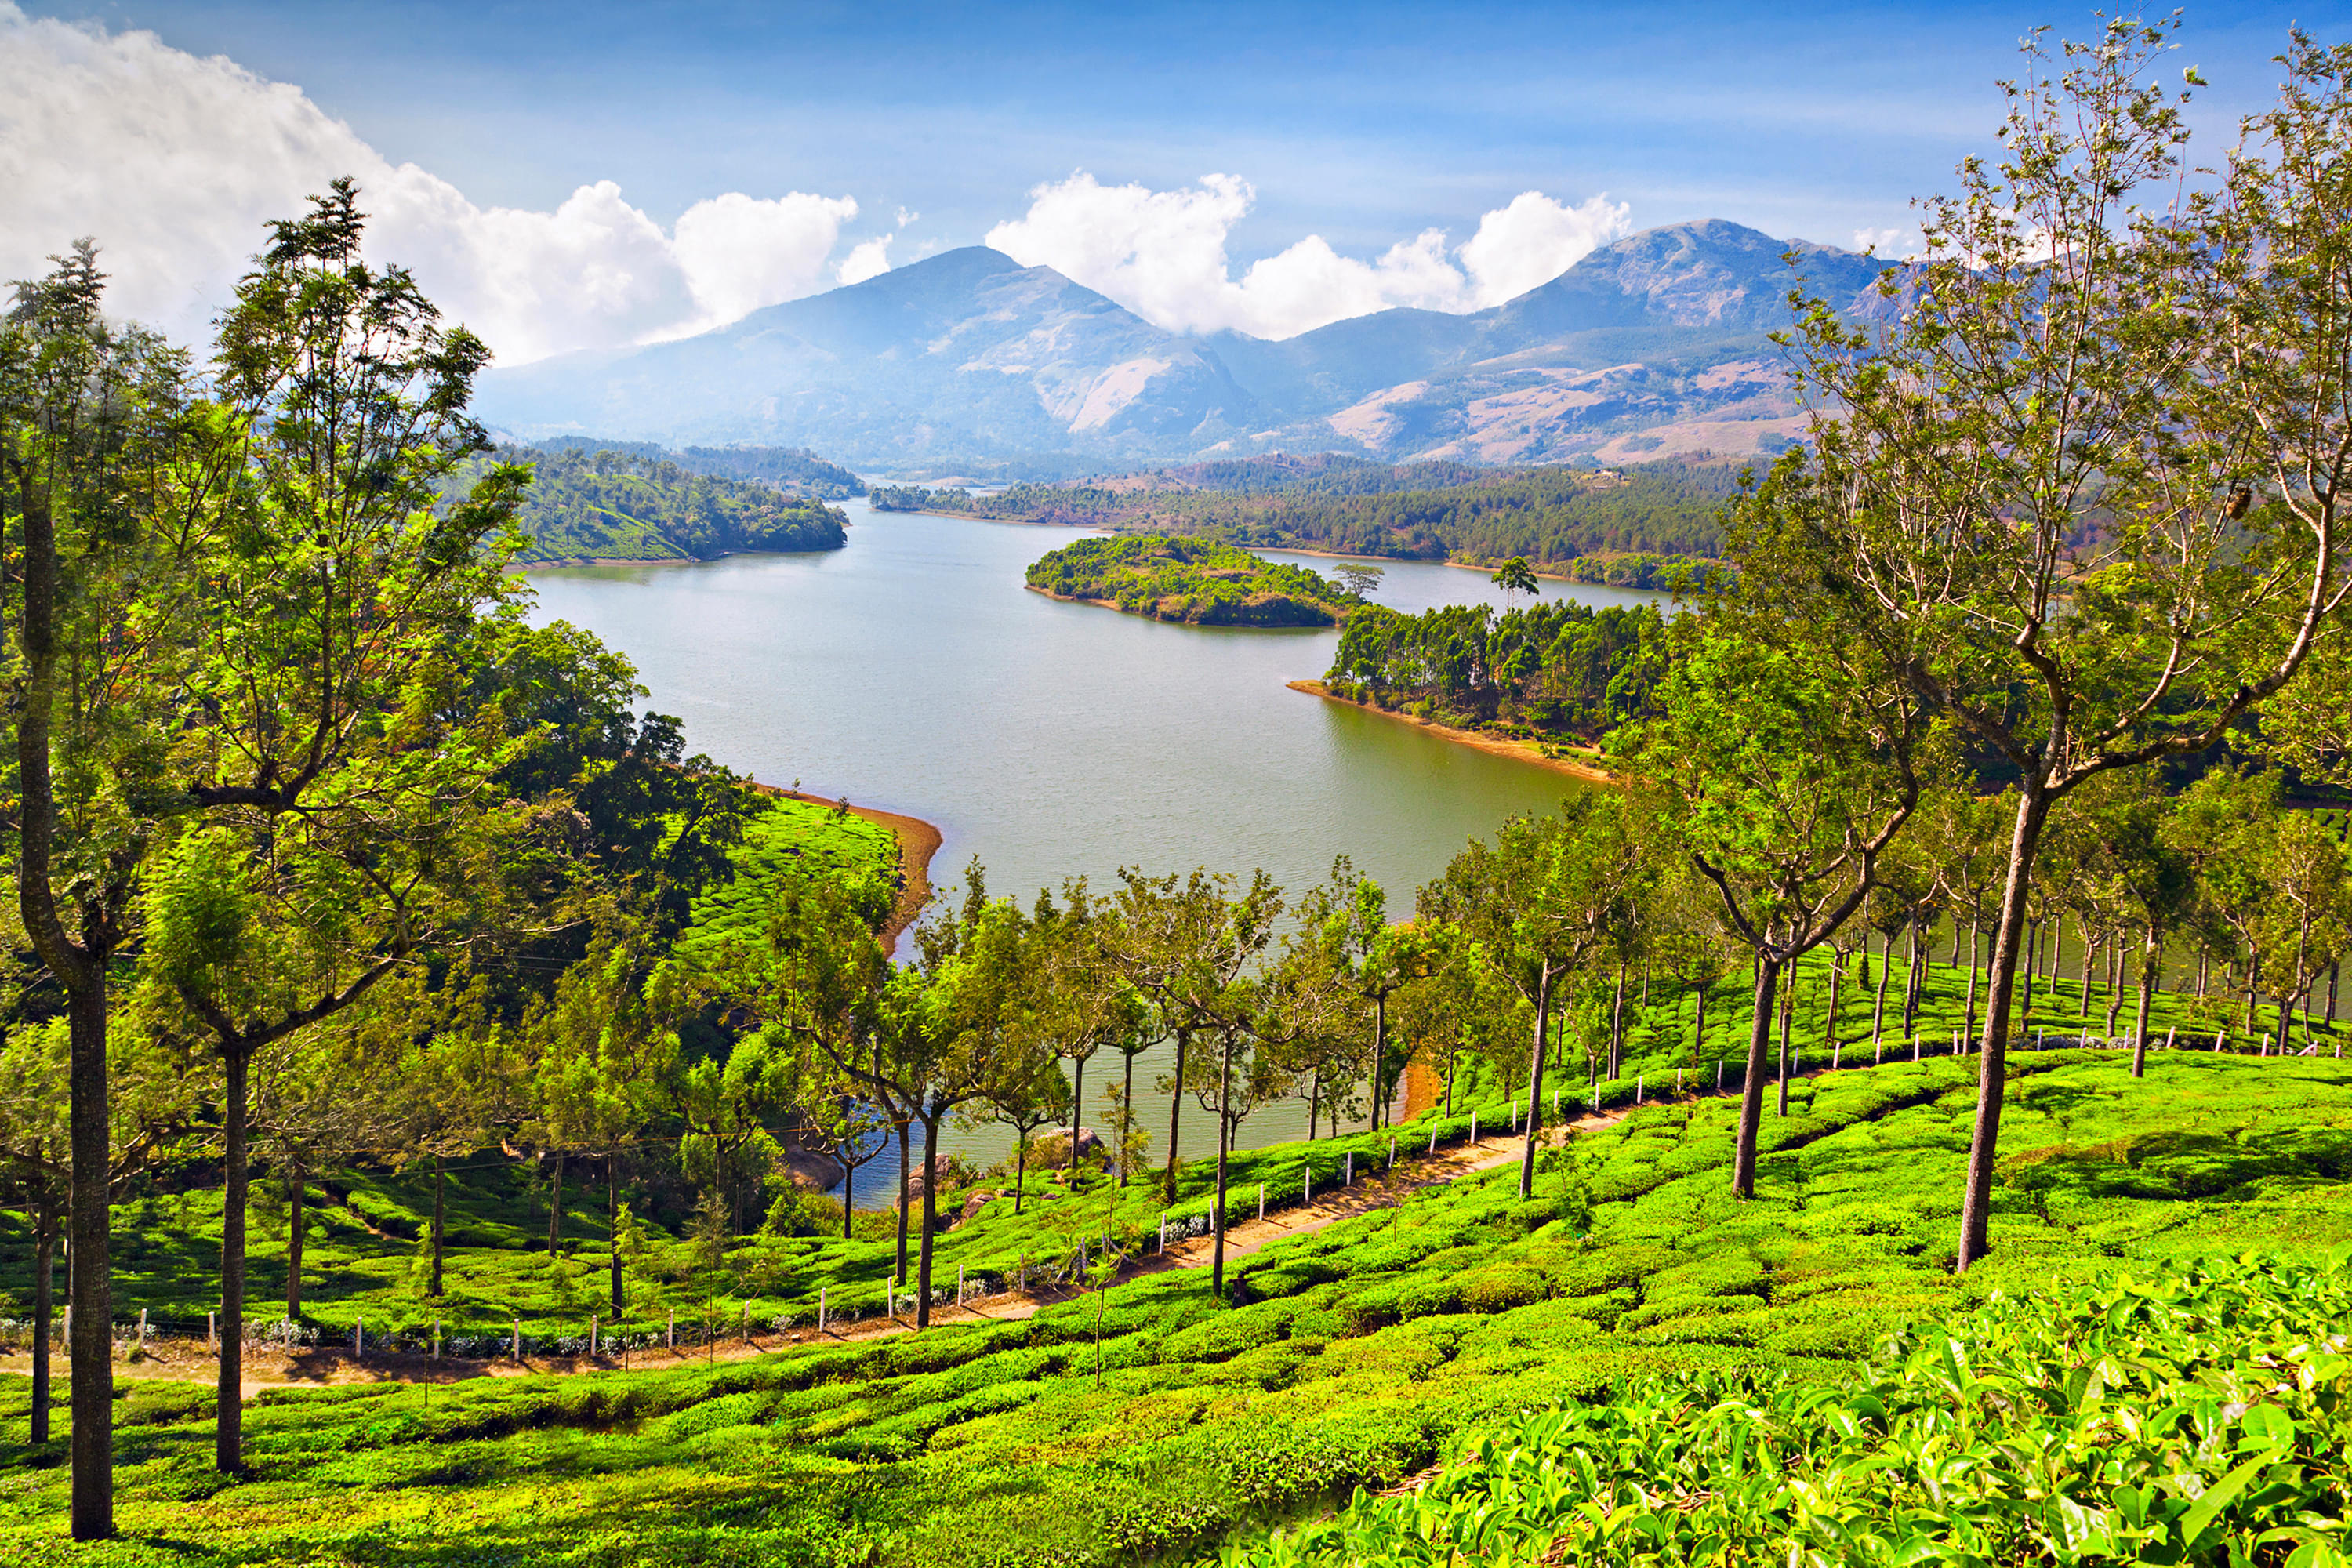 Kerala Tour Packages | UPTO 50% Off February Month Offer